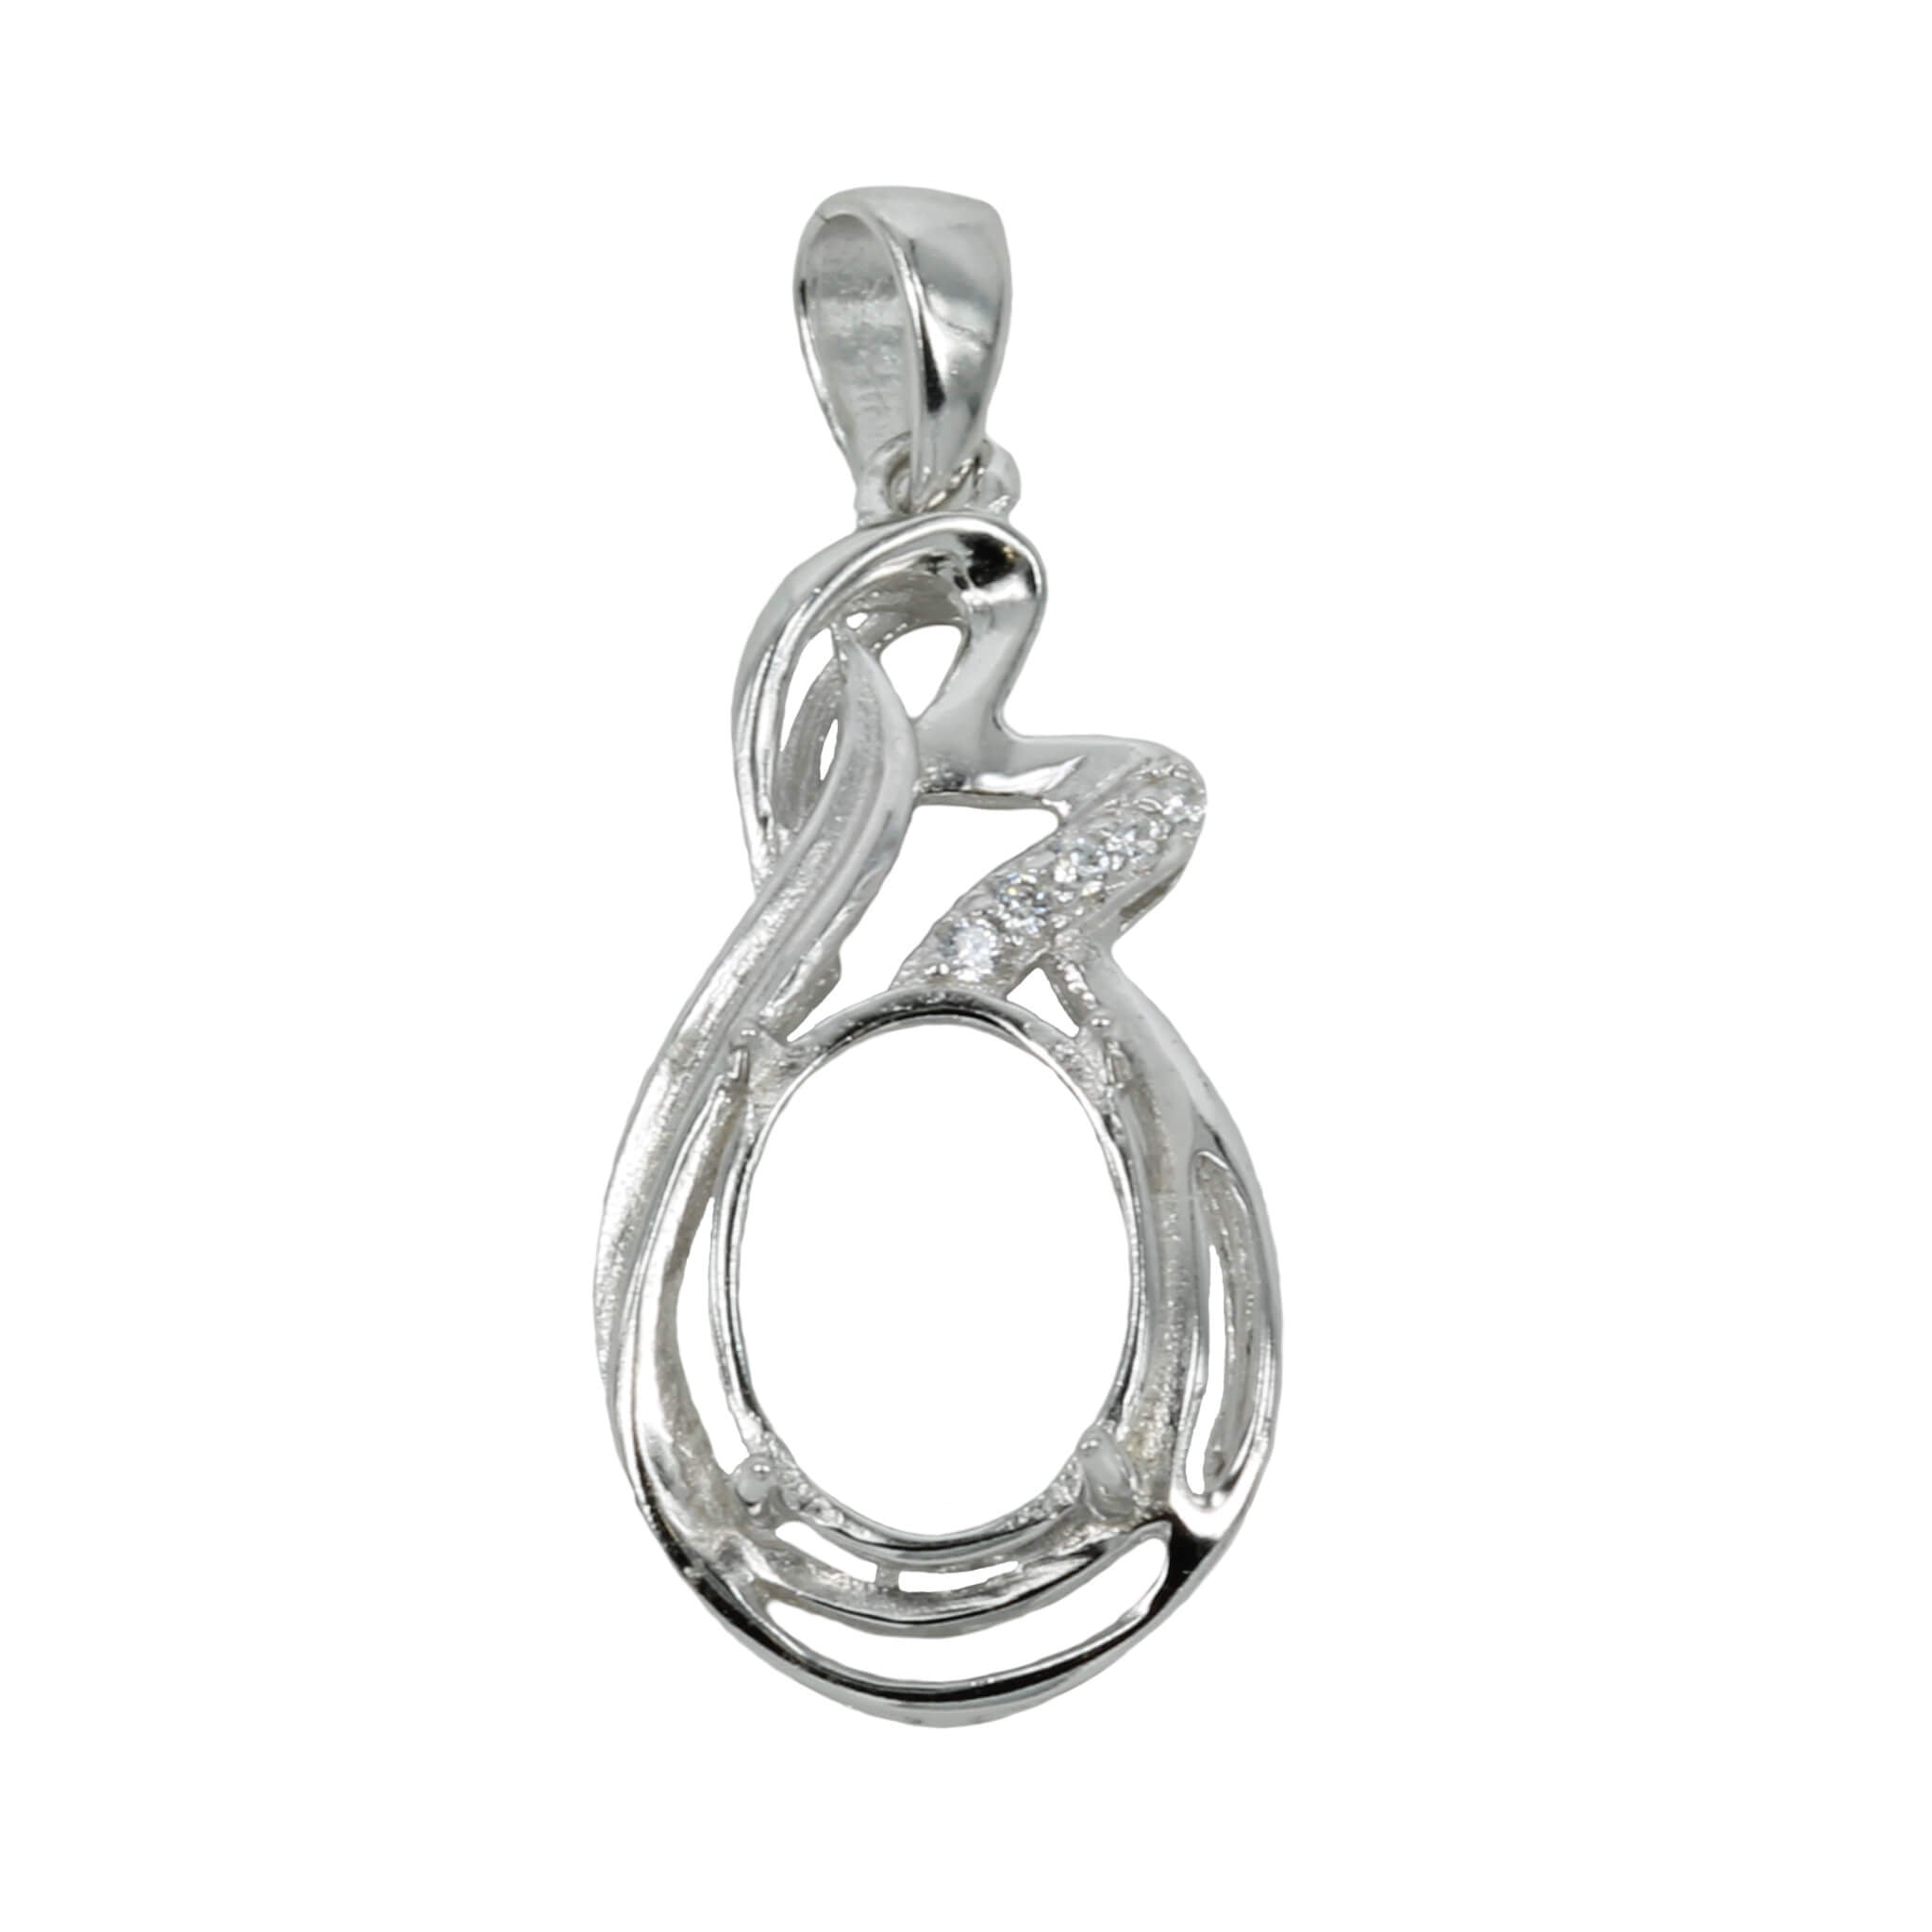 Oval Pendant with Cubic Zirconia and Soldered Loop and Bail in Sterling Silver for 7.3x9.3mm Stones